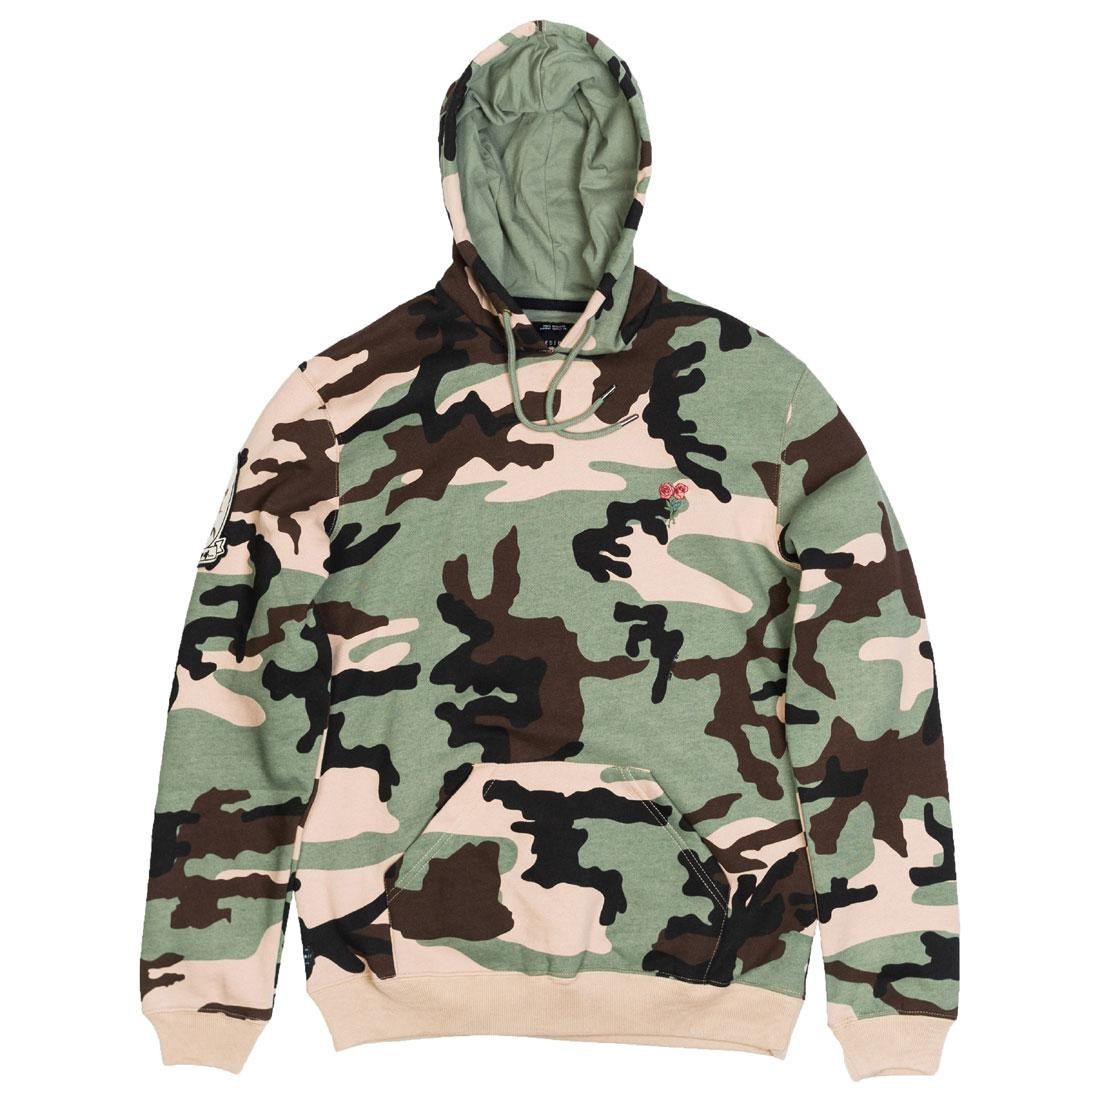 10 Deep Men Thinking Of Your Passing Hoody camo woodland